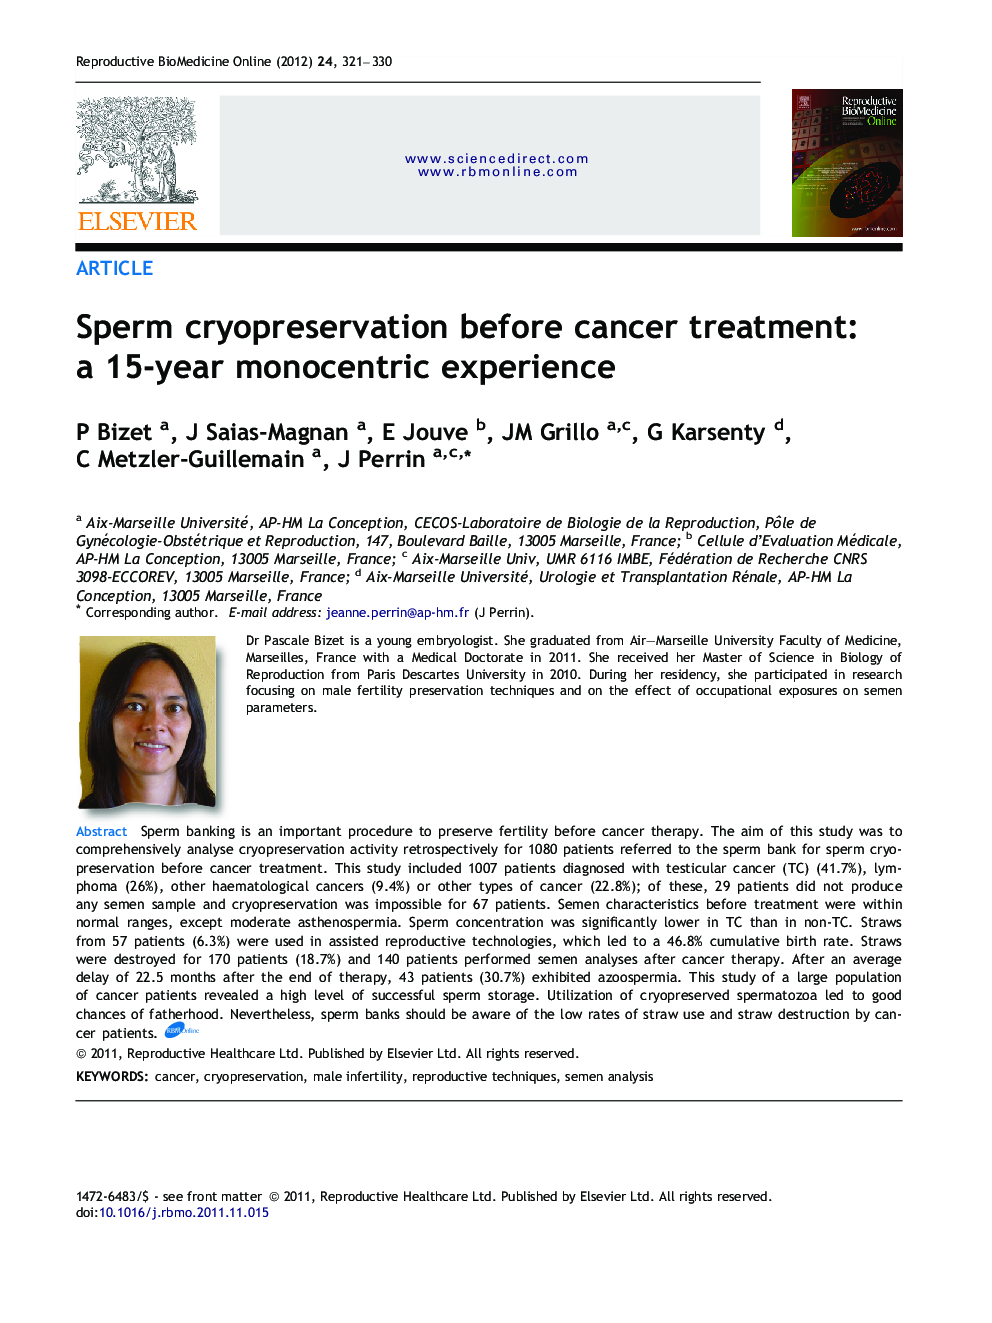 Sperm cryopreservation before cancer treatment: a 15-year monocentric experience 